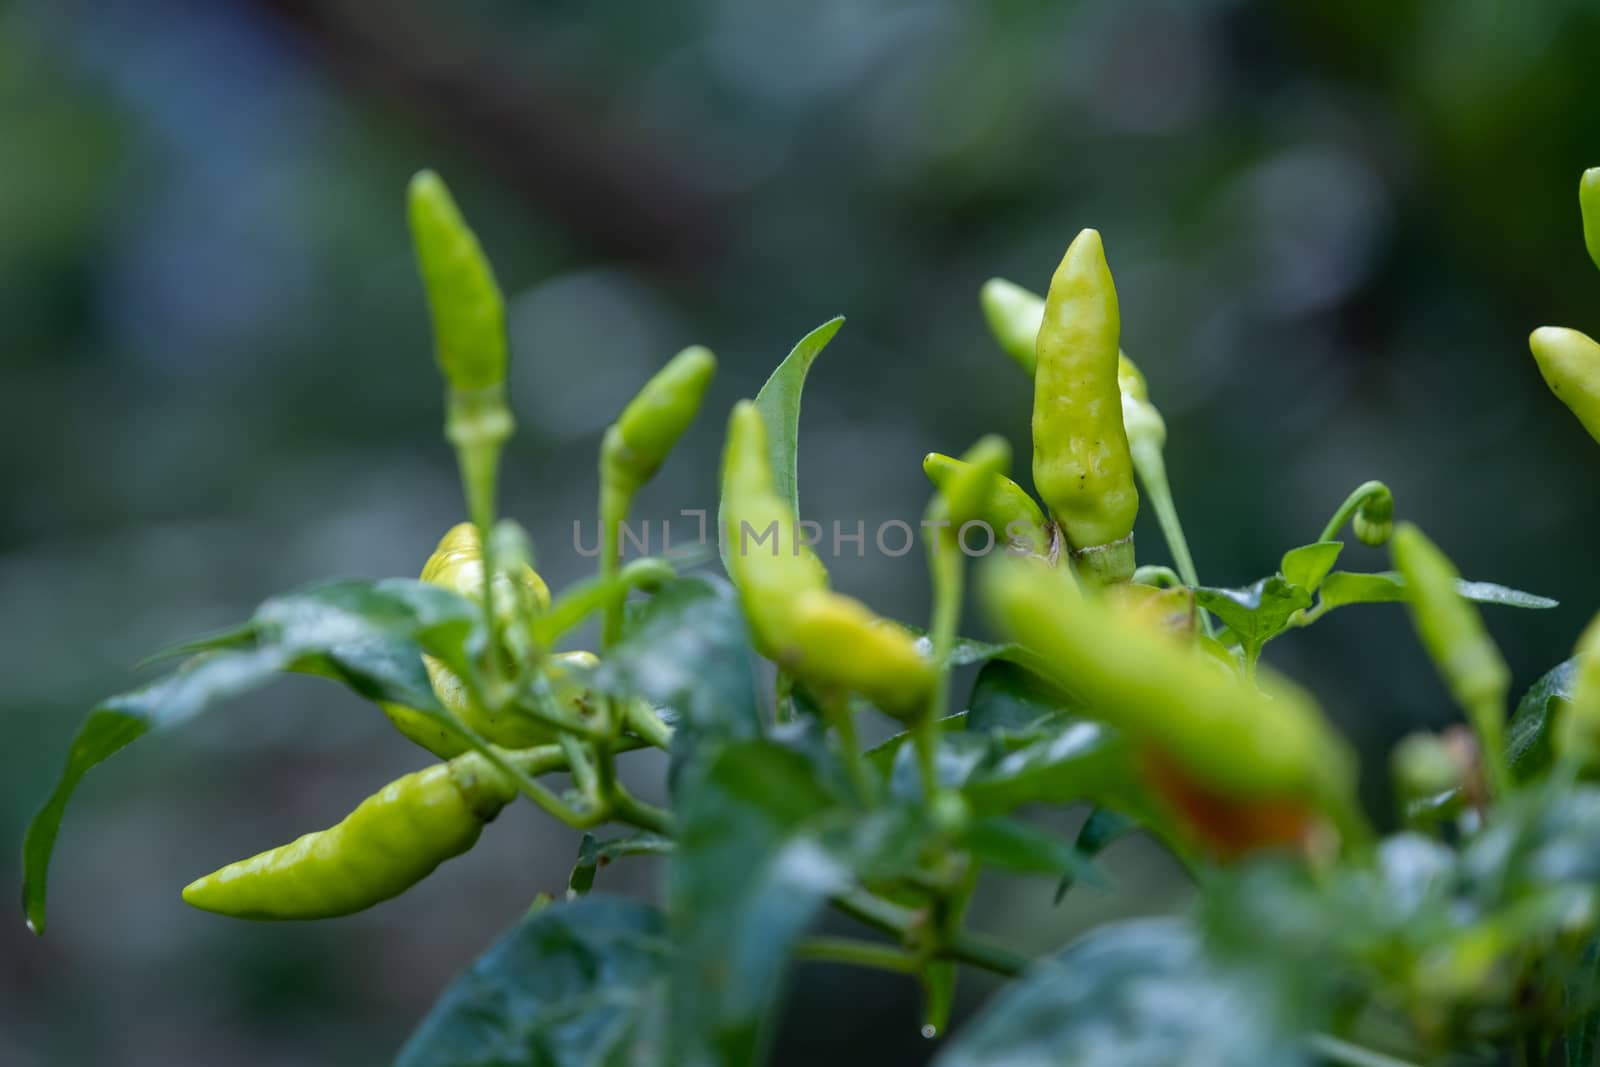 The Select focus Close up shot of a green chilli tree in the garden by peerapixs